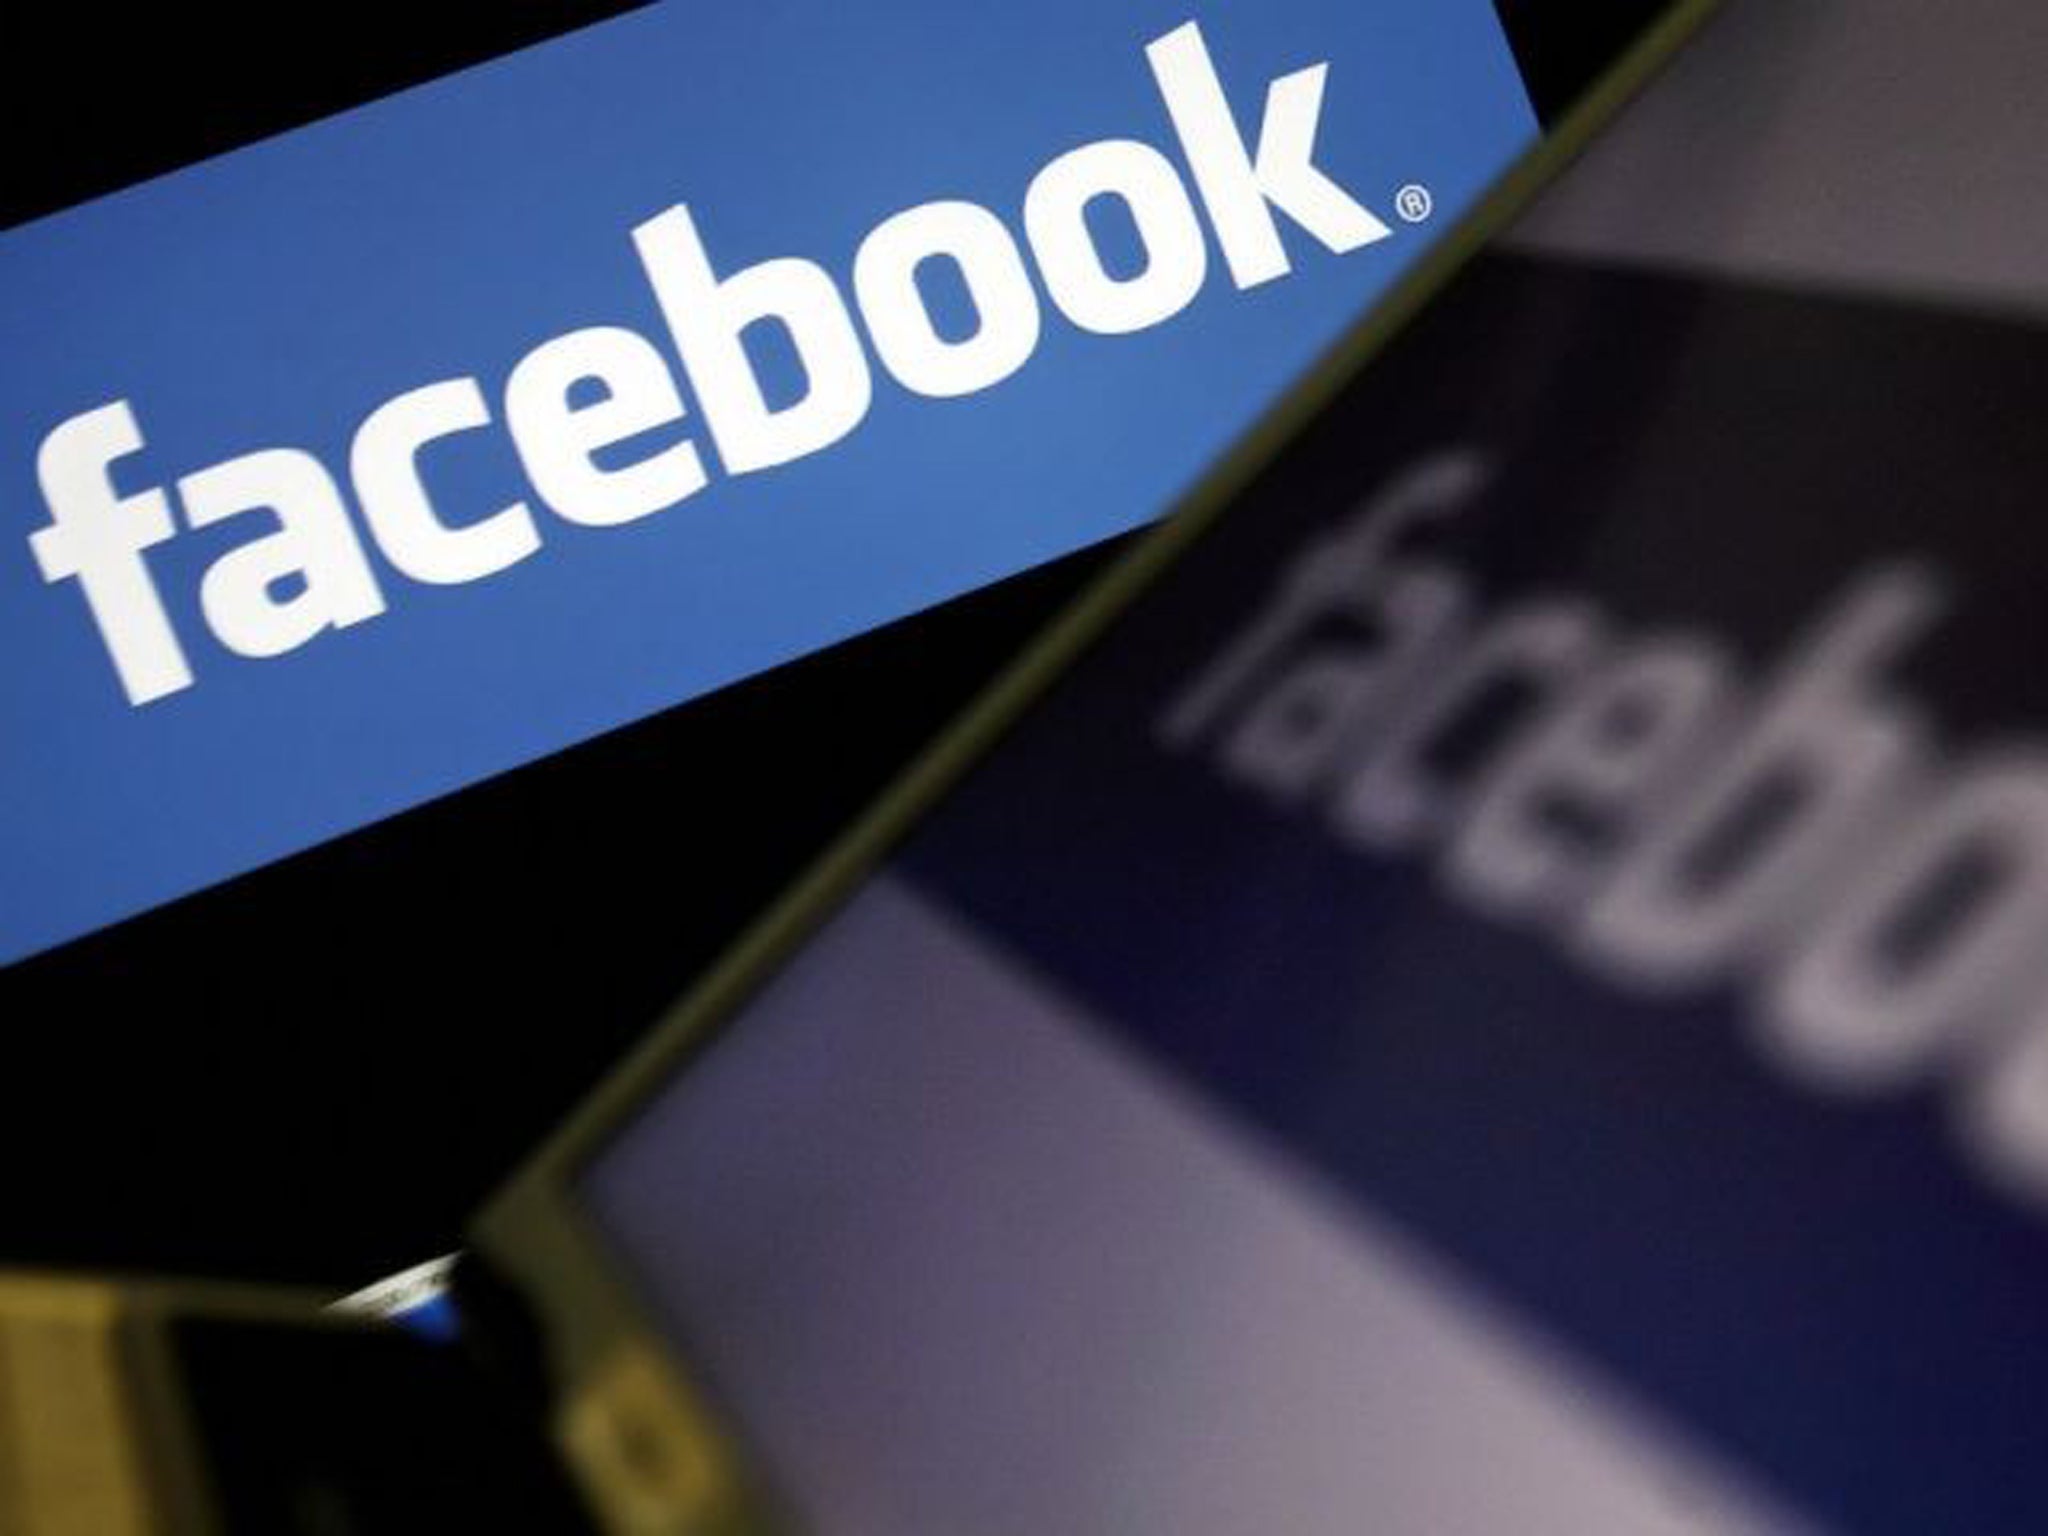 Proposed changes to Facebook's privacy policy could see the social network expanding their facial recognition database.